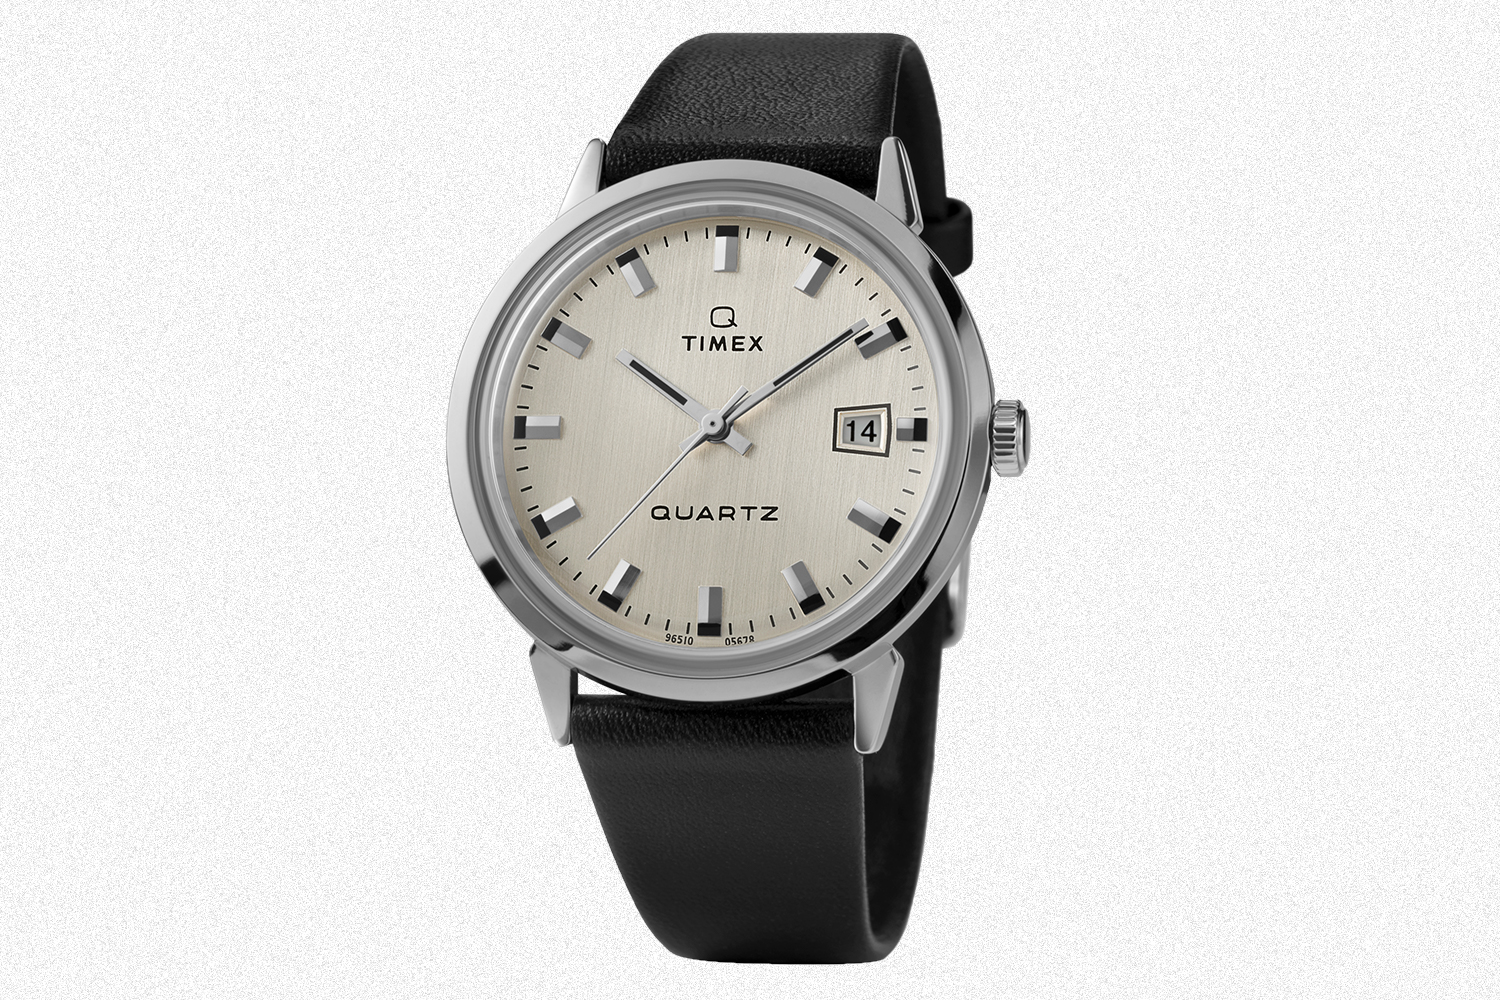 The Beauty Is in the Details of the New Q Timex 1978 Watch